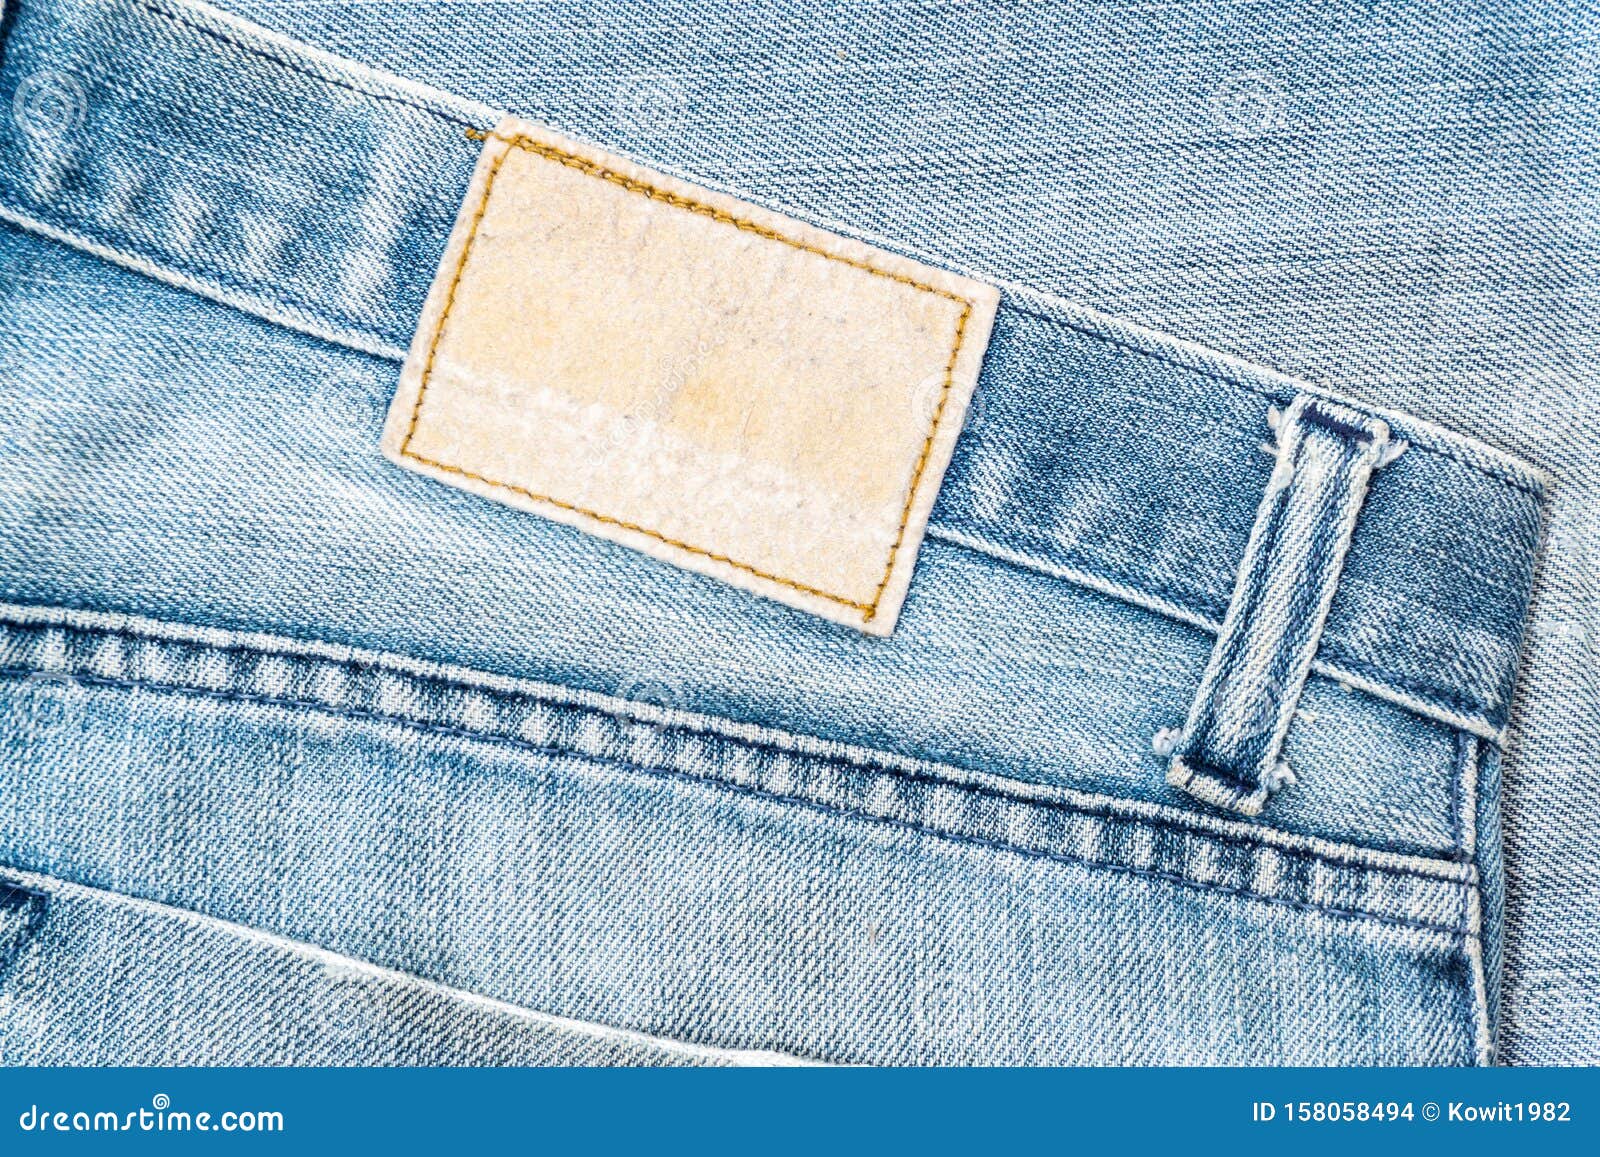 Closeup of Blank Grungy Leather Label on Worn Blue Denim with Orange ...